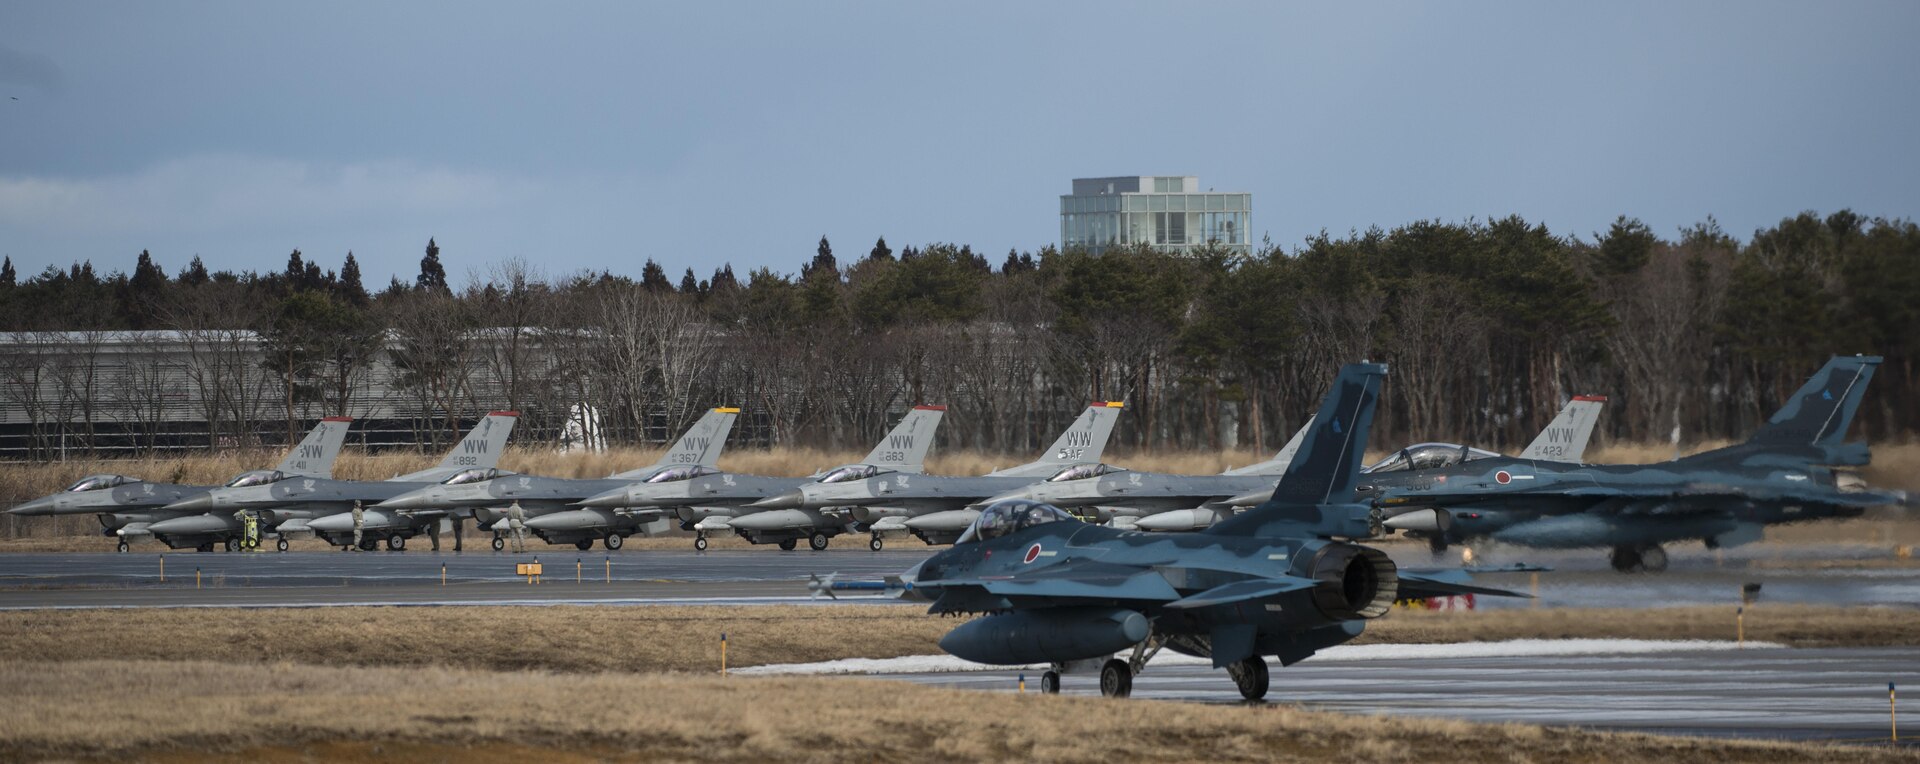 F-16 Fighting Falcons and F-2 Mitsubishis prepare for take-off during a dissimilar air combat-training at Misawa Air Base, Japan, March 17, 2017. The F-16s had the duty of providing a suppression of enemy air defenses and escorting the F-2s into the targets area.